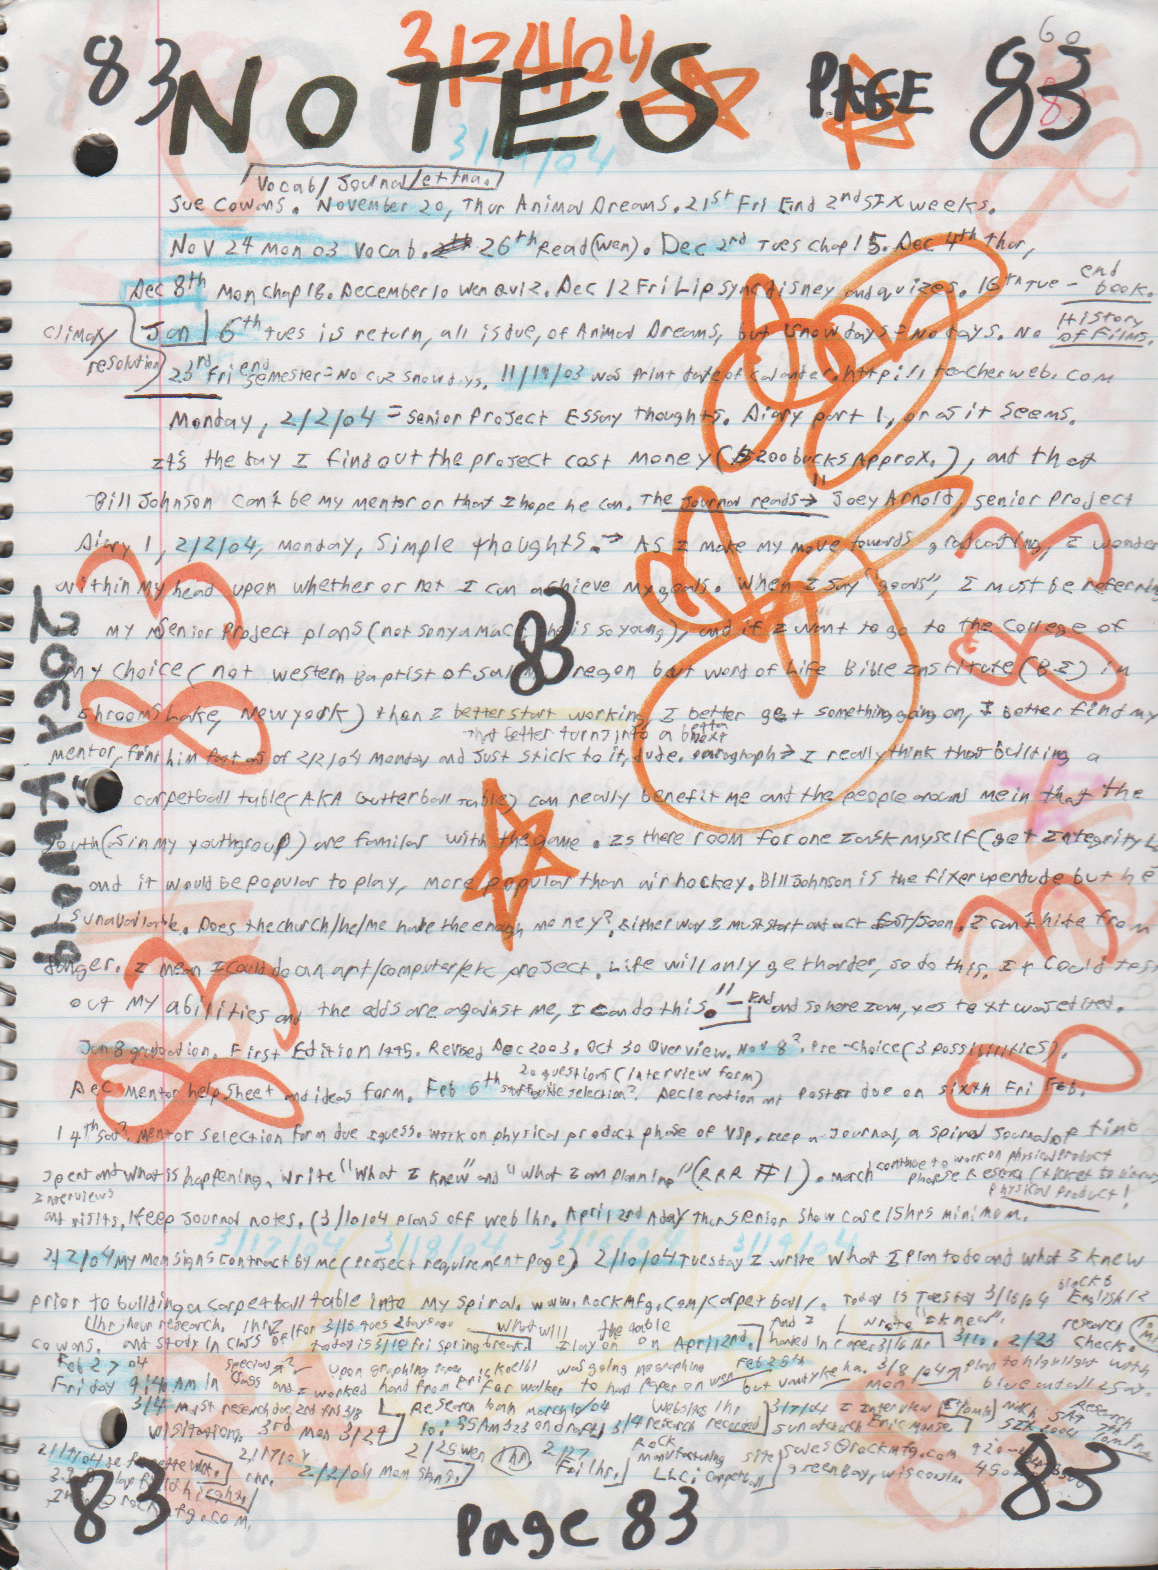 2004-01-29 - Thursday - Carpetball FGHS Senior Project Journal, Joey Arnold, Part 02, 96pages numbered, Notebook-81.png